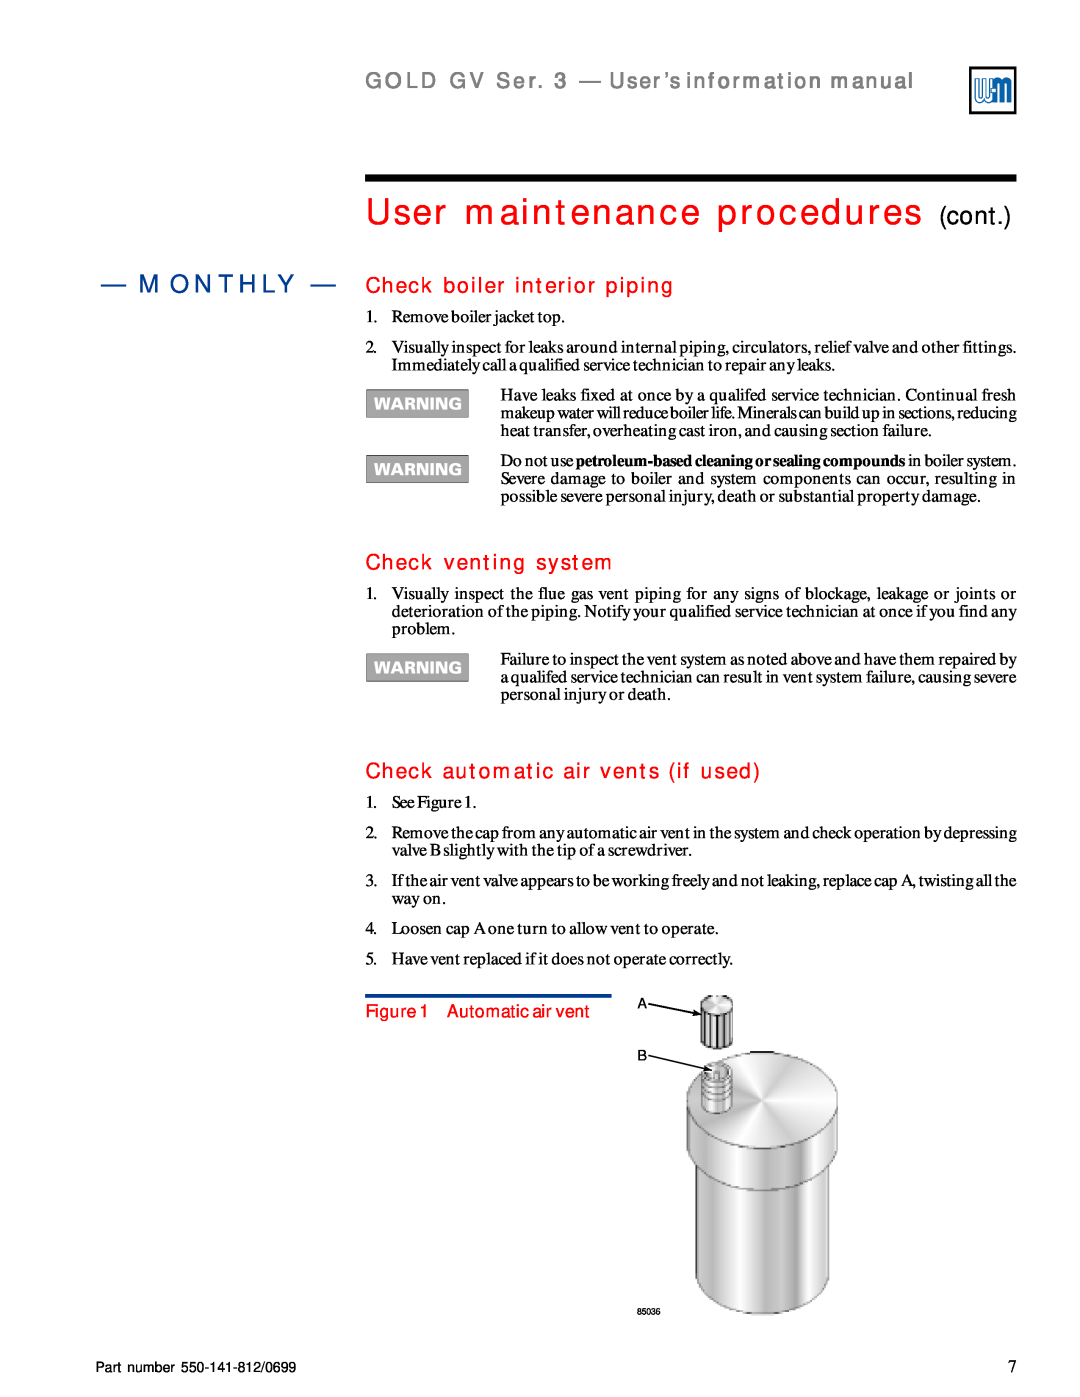 Weil-McLain 3 Series User maintenance procedures cont, GOLD GV Ser. 3 — User’s information manual, Check venting system 